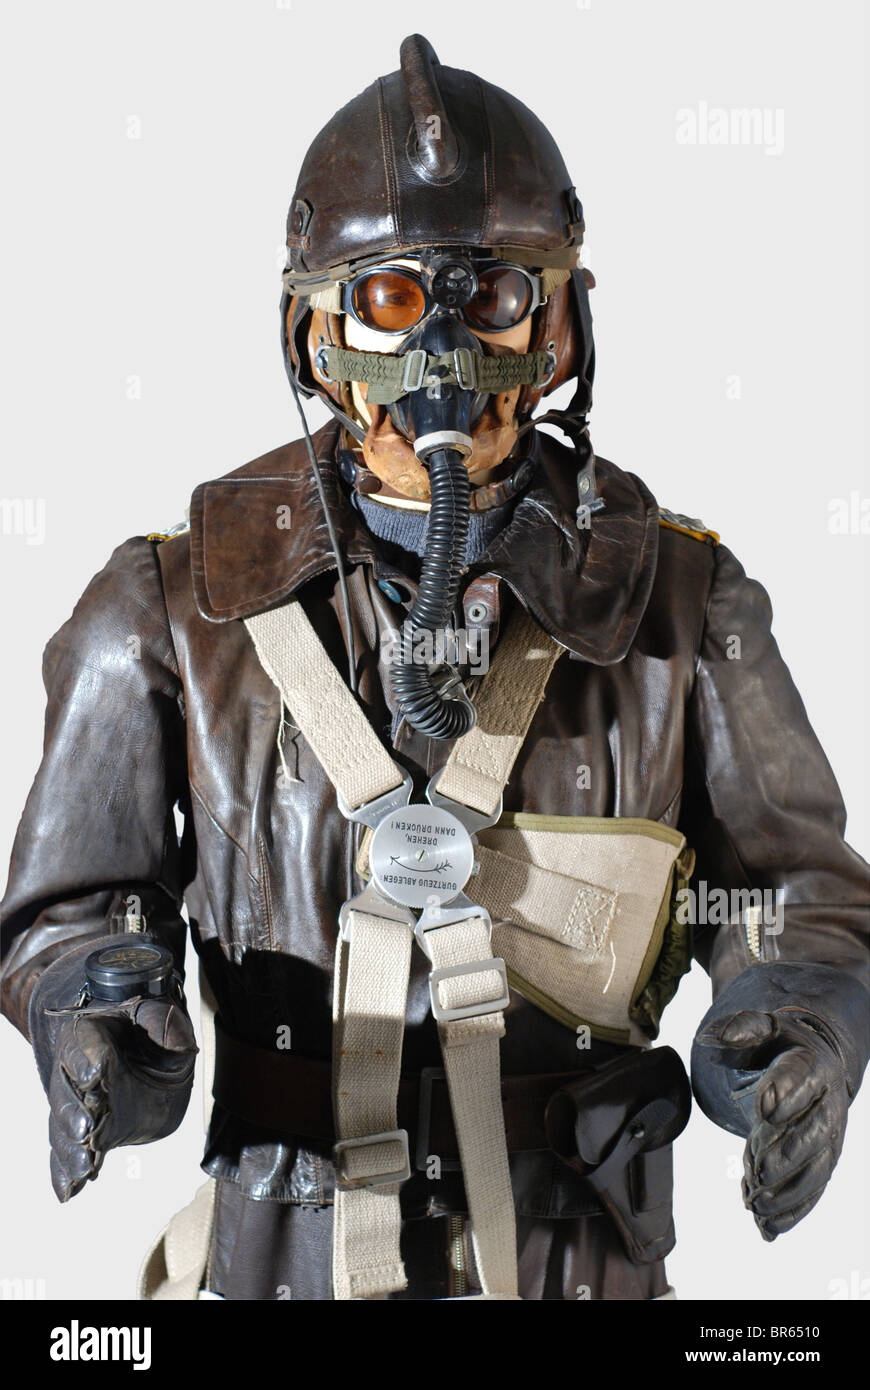 A Luftwaffe fighter pilot in the Reich's air defense., A model SSK 90 pilot's steel helmet. Skull of riveted steel plates with brown leather cover and cylindrical head pad, sand-coloured mottled cotton lining, complete with straps. A LKp S101 sand-coloured, linen flying helmet with brown leather trim, three- historic, historical, people, 1910s, 20th century, Second World War / WWII, object, objects, clipping, cut out, cut-out, cut-outs, stills, military, militaria, Luftwaffe, German Air Force, branch of service, branches of service, armed service, armed service, Stock Photo